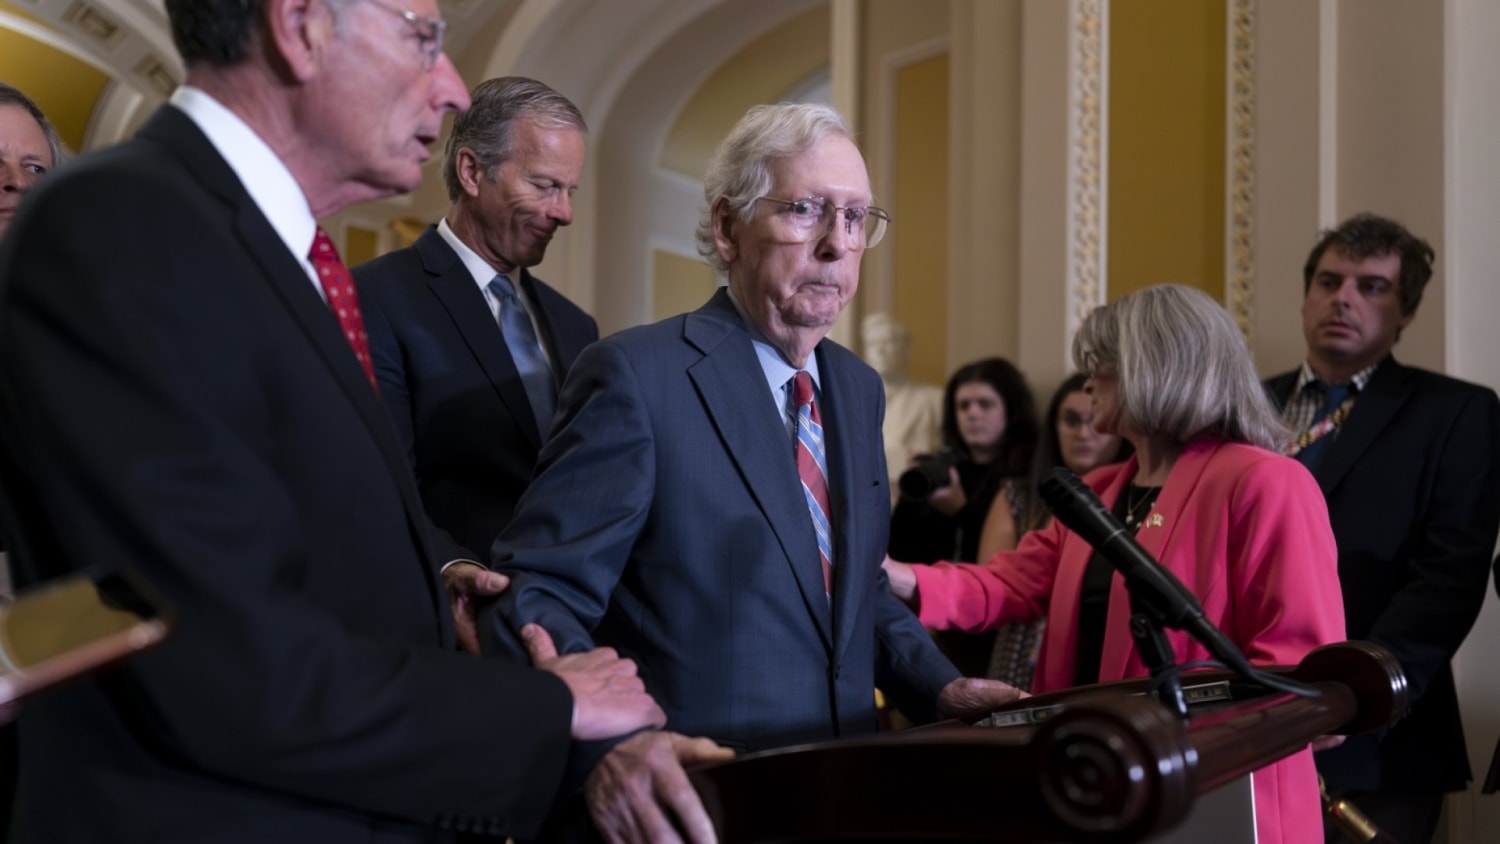 Video: Mitch McConnell freezes up during news conference